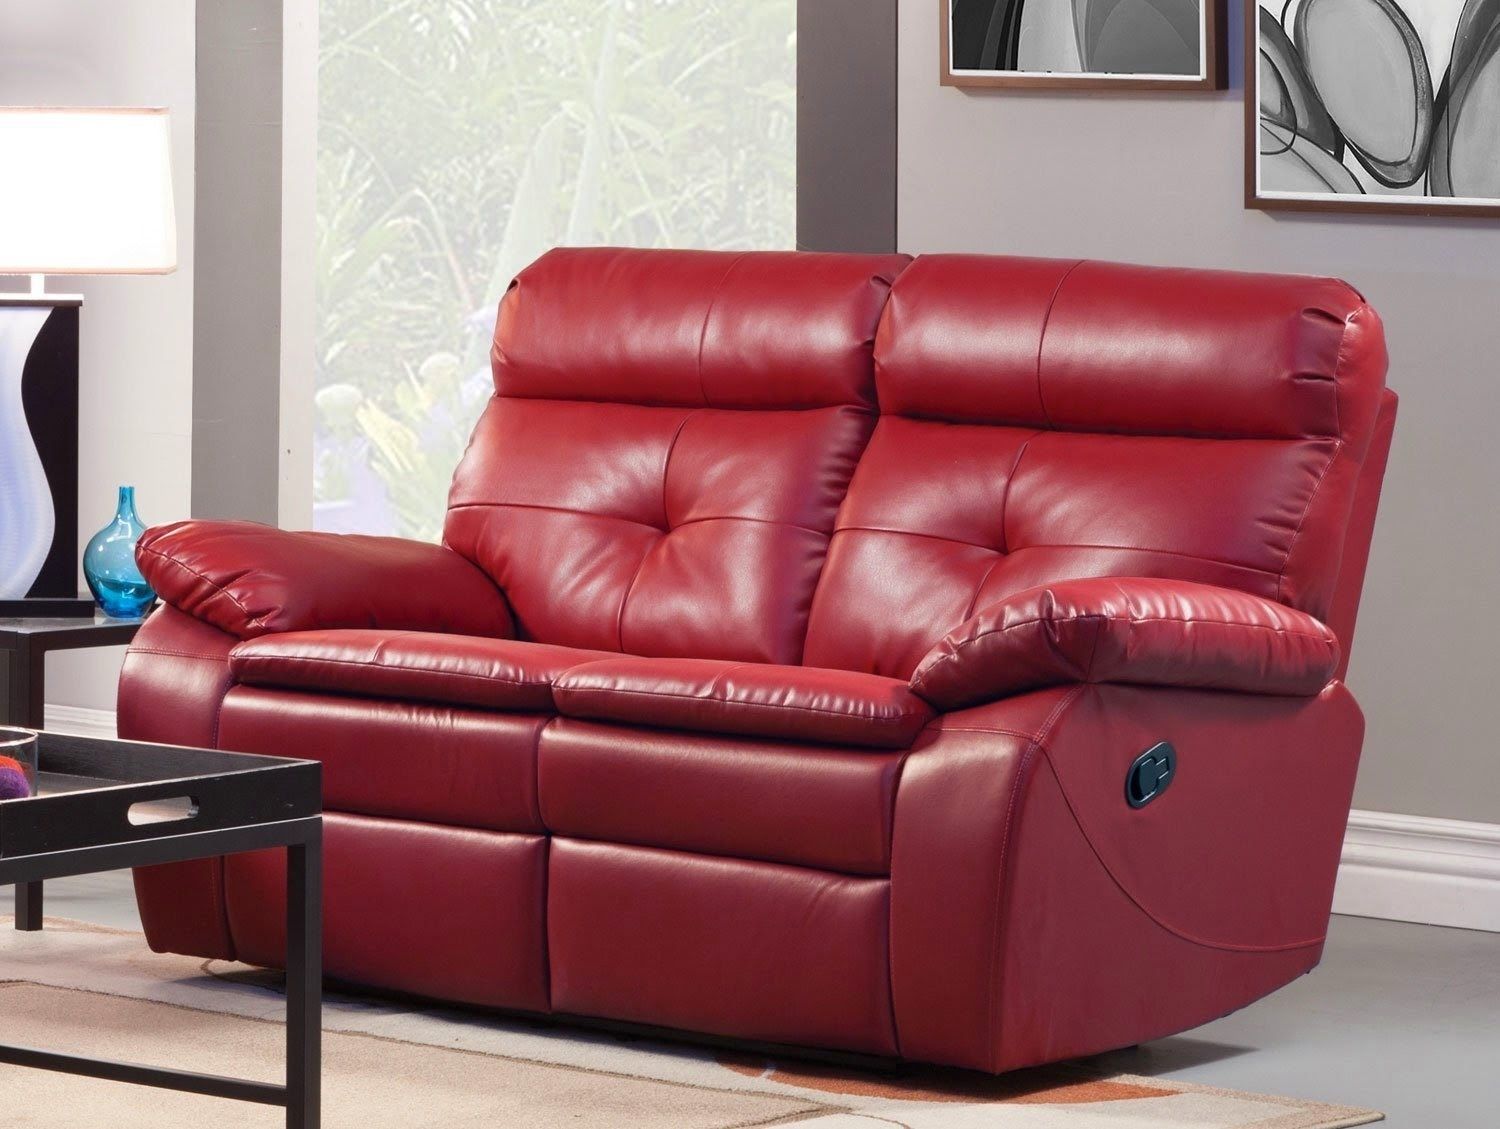 Good Red Leather Reclining Sofa And Loveseat 71 Sofa Design Ideas Intended For Red Leather Reclining Sofas And Loveseats (Photo 4 of 15)